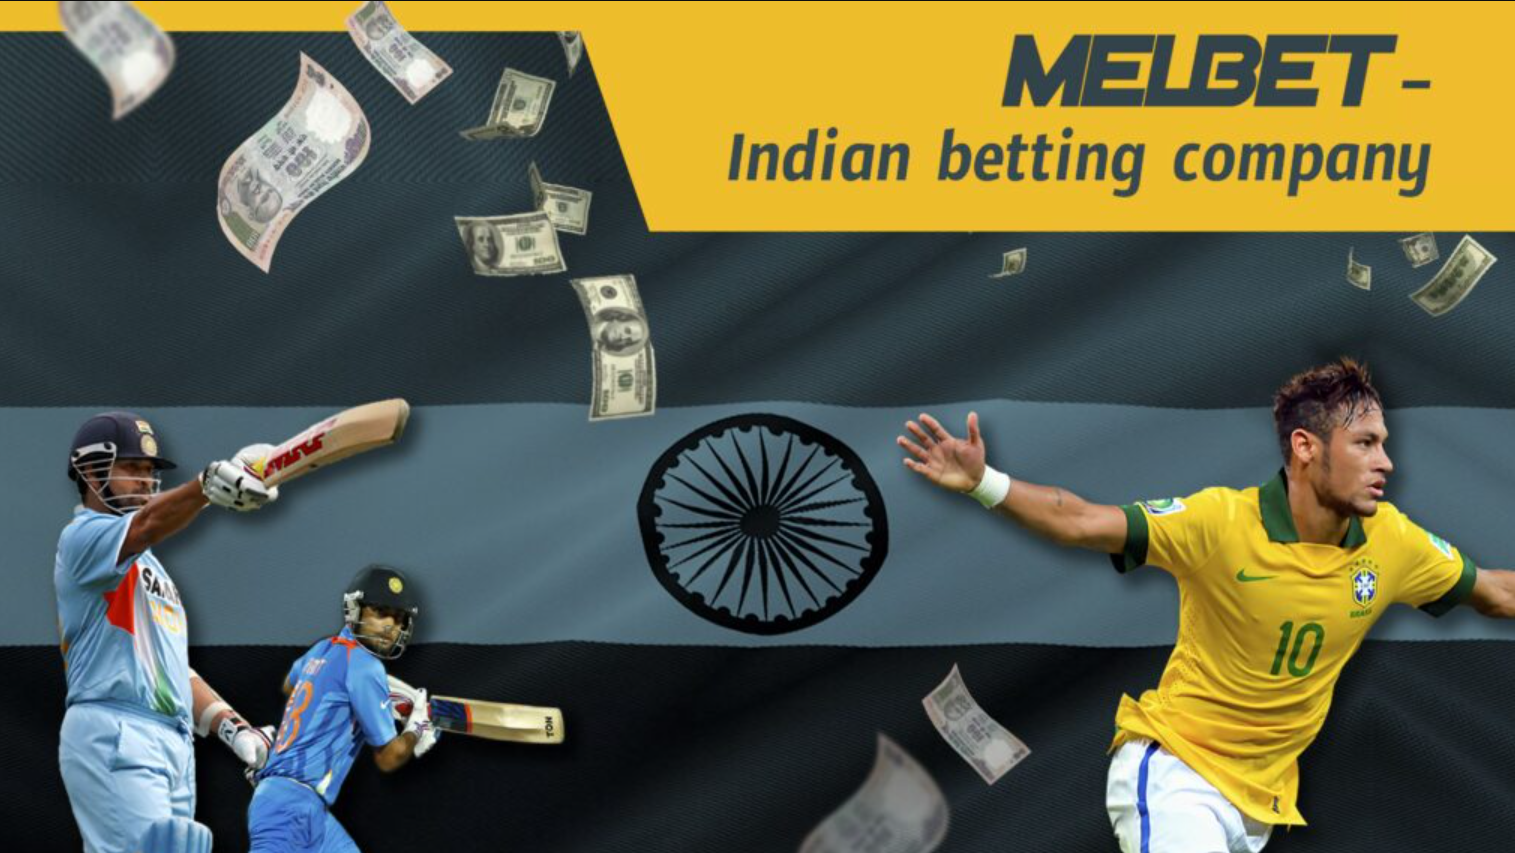 How to download and install Melbet India apk